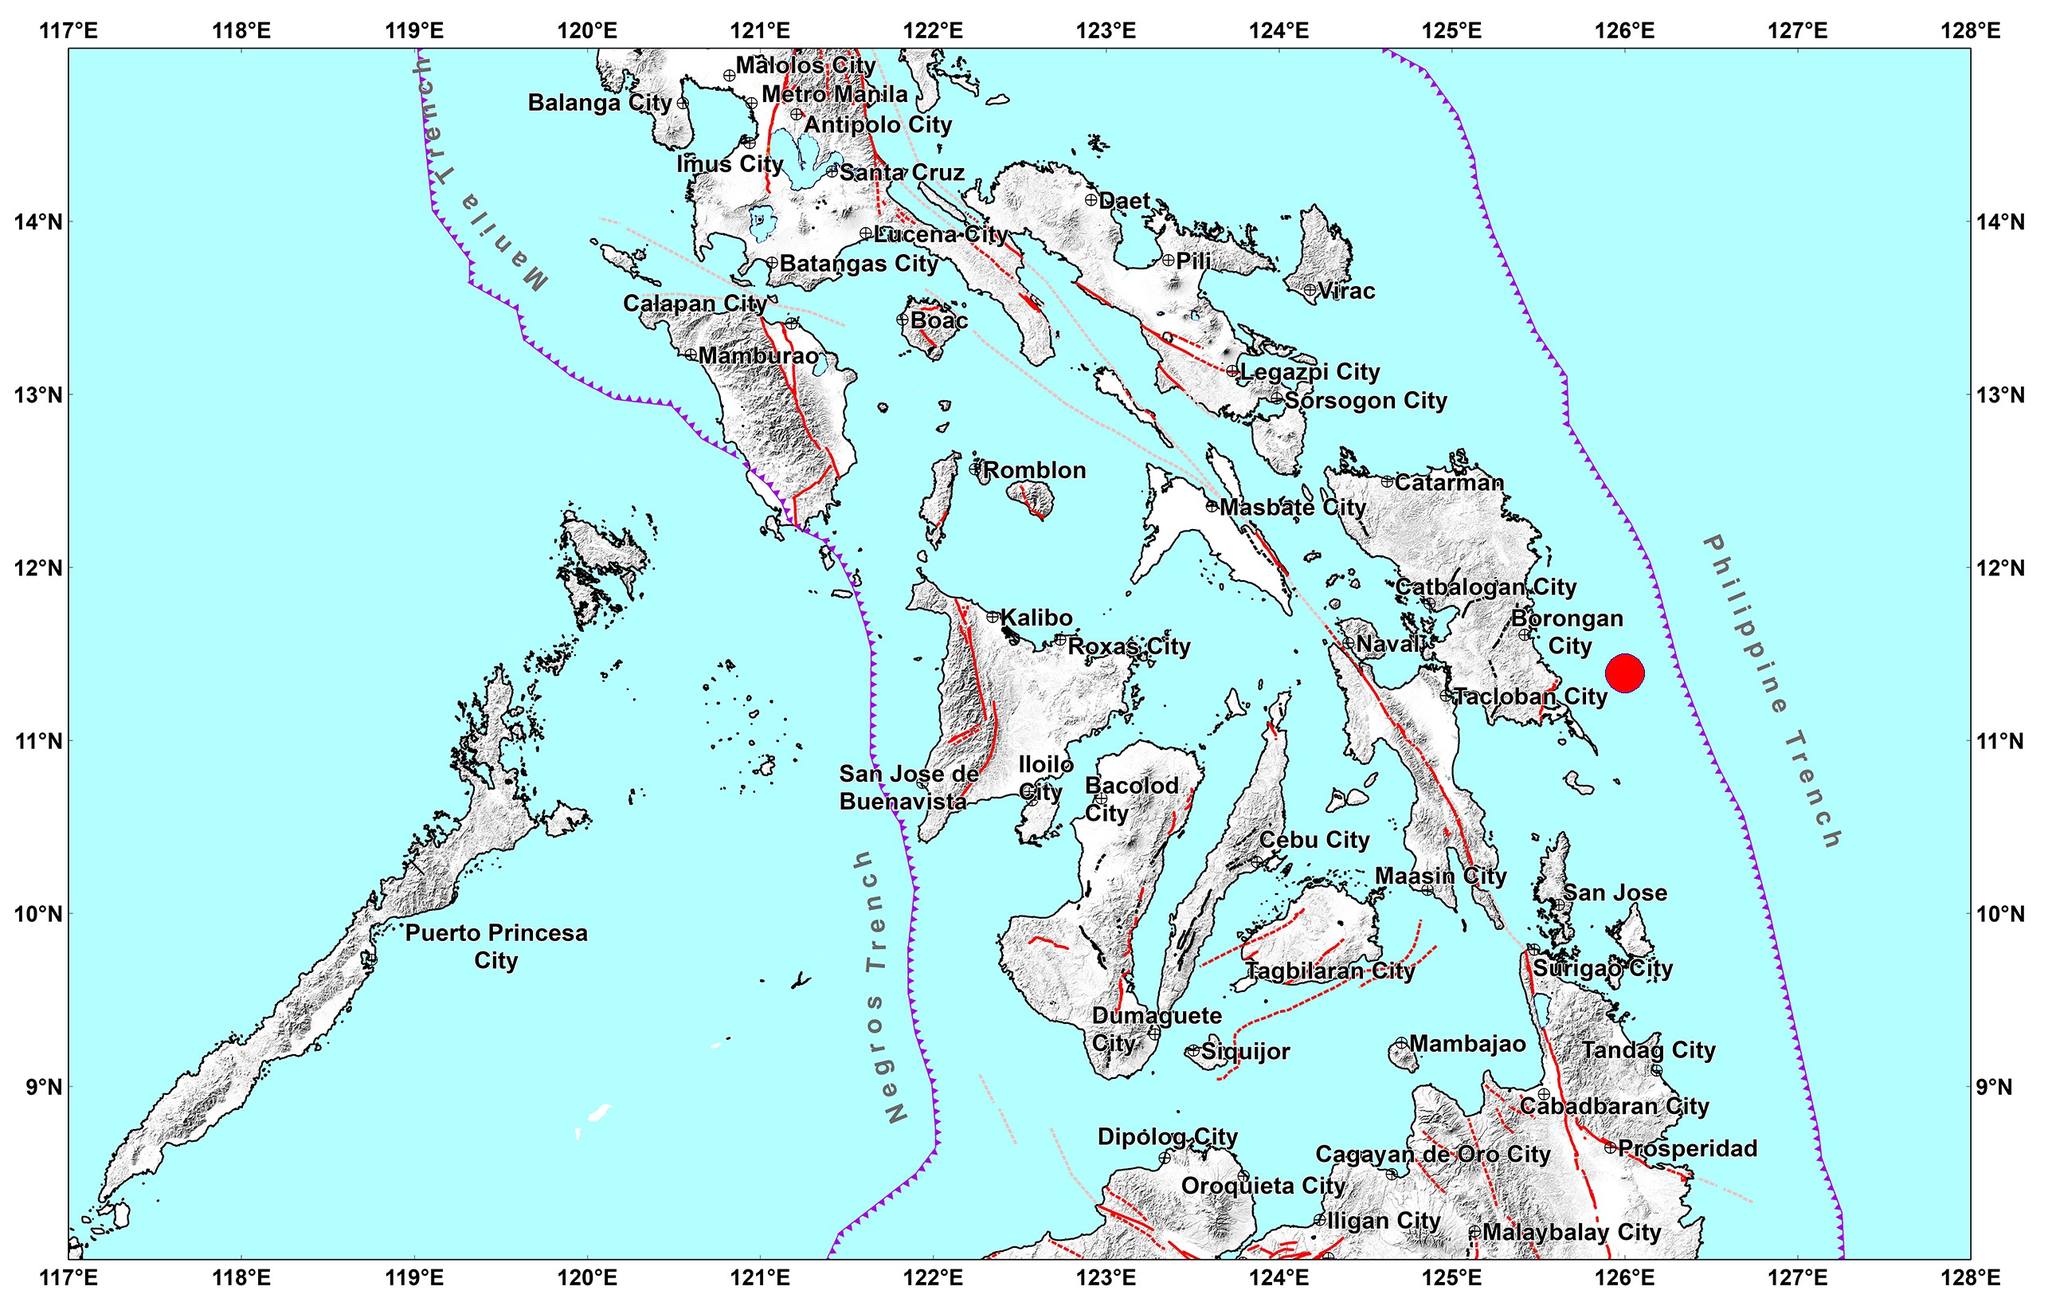 he Philippine Institute of Volcanology and Seismology says that a magnitude 4.9 earthquake struck near the waters of Hernani, Eastern Samar at 4:02 on Tuesday, May 7, 2024 (Photo courtesy of Phivolcs)The Philippine Institute of Volcanology and Seismology says that a magnitude 4.9 earthquake struck near the waters of Hernani, Eastern Samar at 4:02 on Tuesday, May 7, 2024 (Photo courtesy of Phivolcs)
